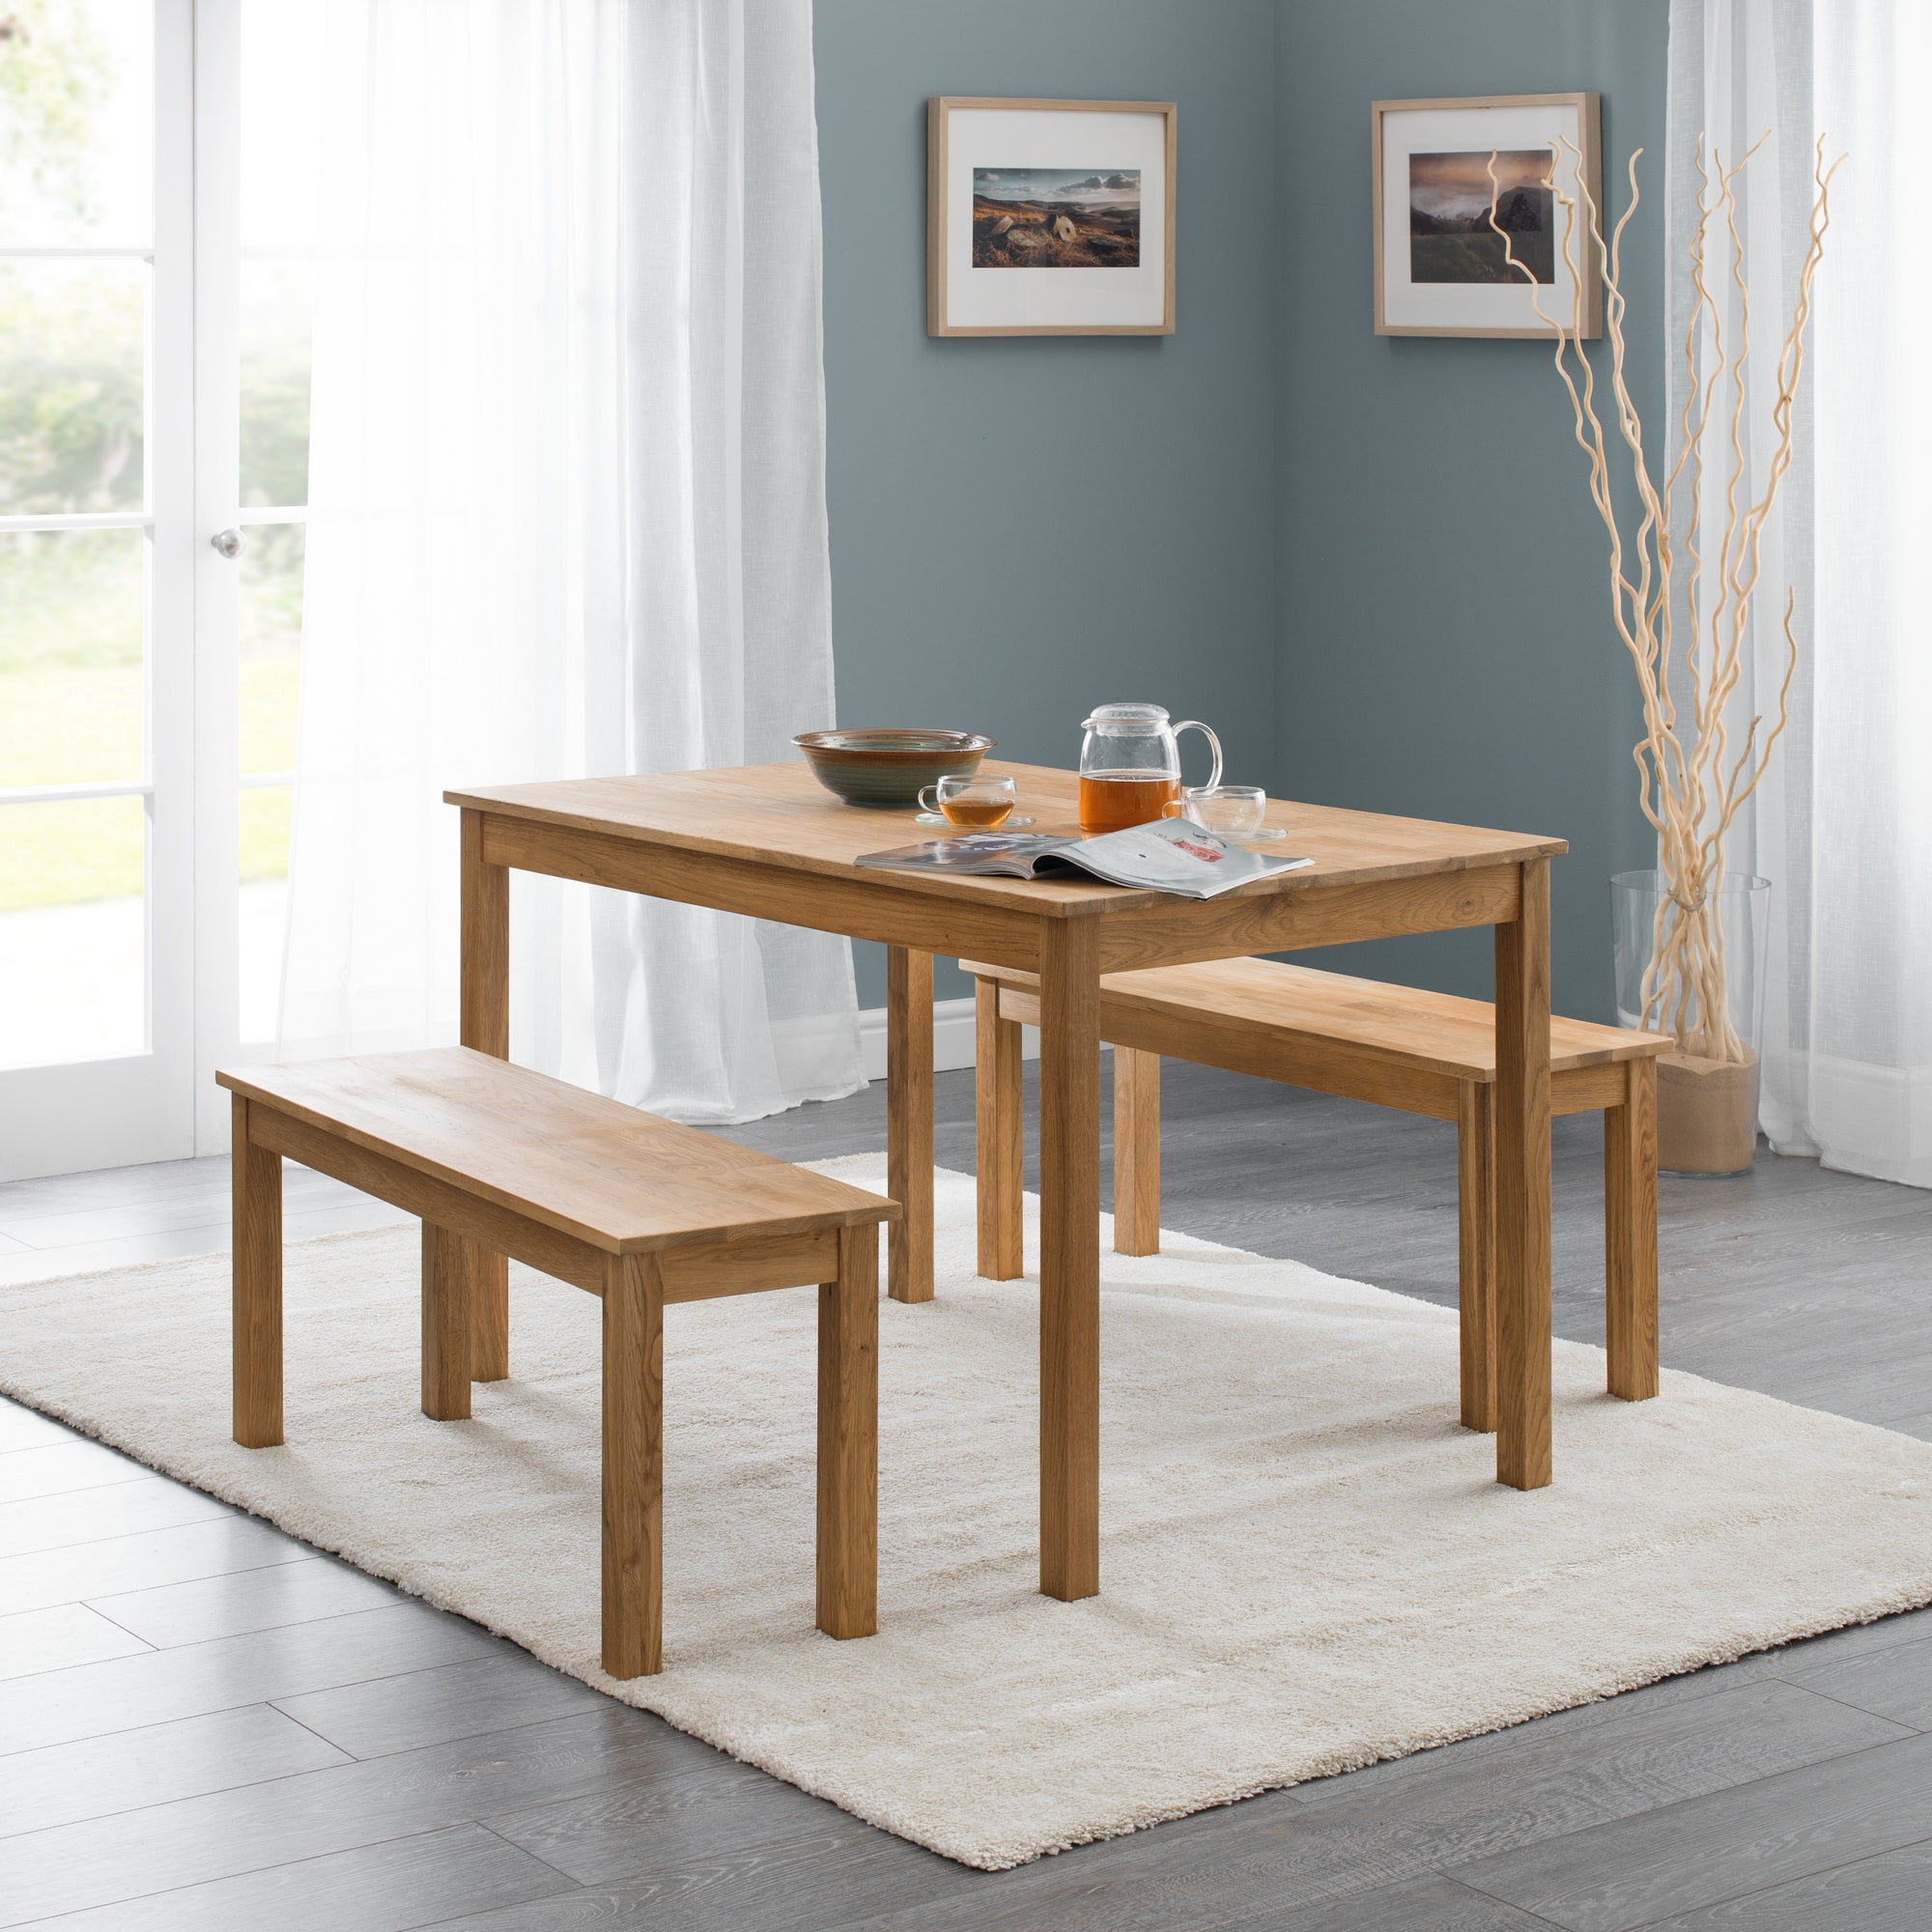 Coxmoor 2 Seater Dining Bench Solid Oak Brown